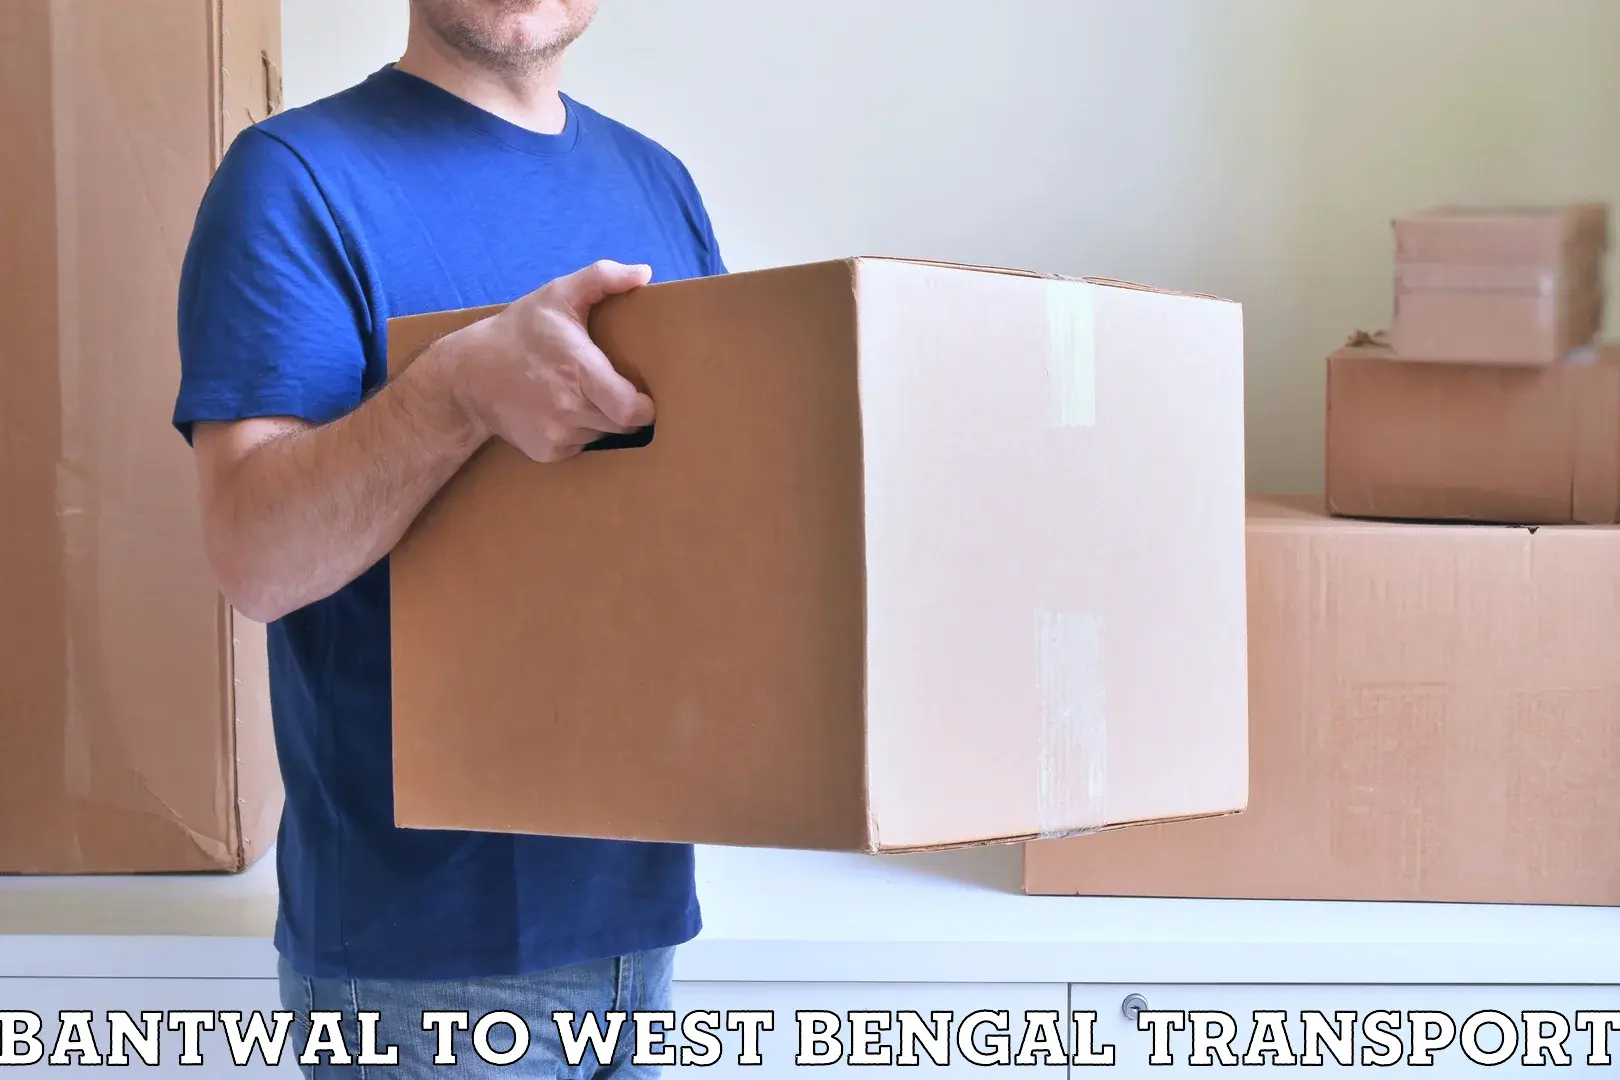 Vehicle parcel service Bantwal to Silda